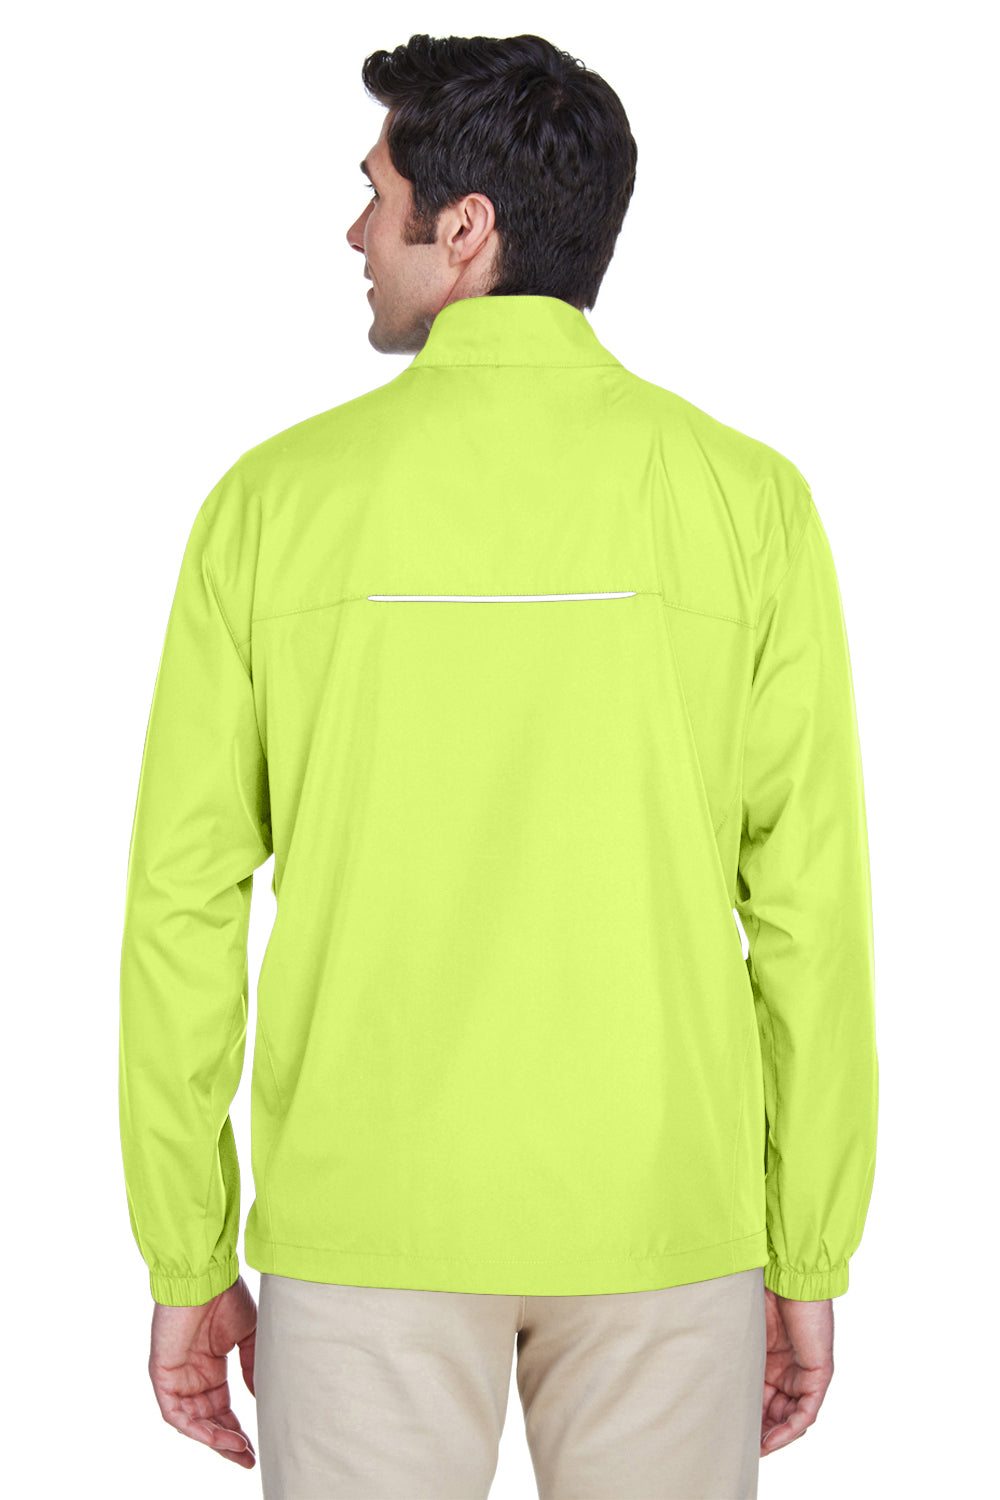 Core 365 88183 Mens Motivate Water Resistant Full Zip Jacket Safety Yellow Back